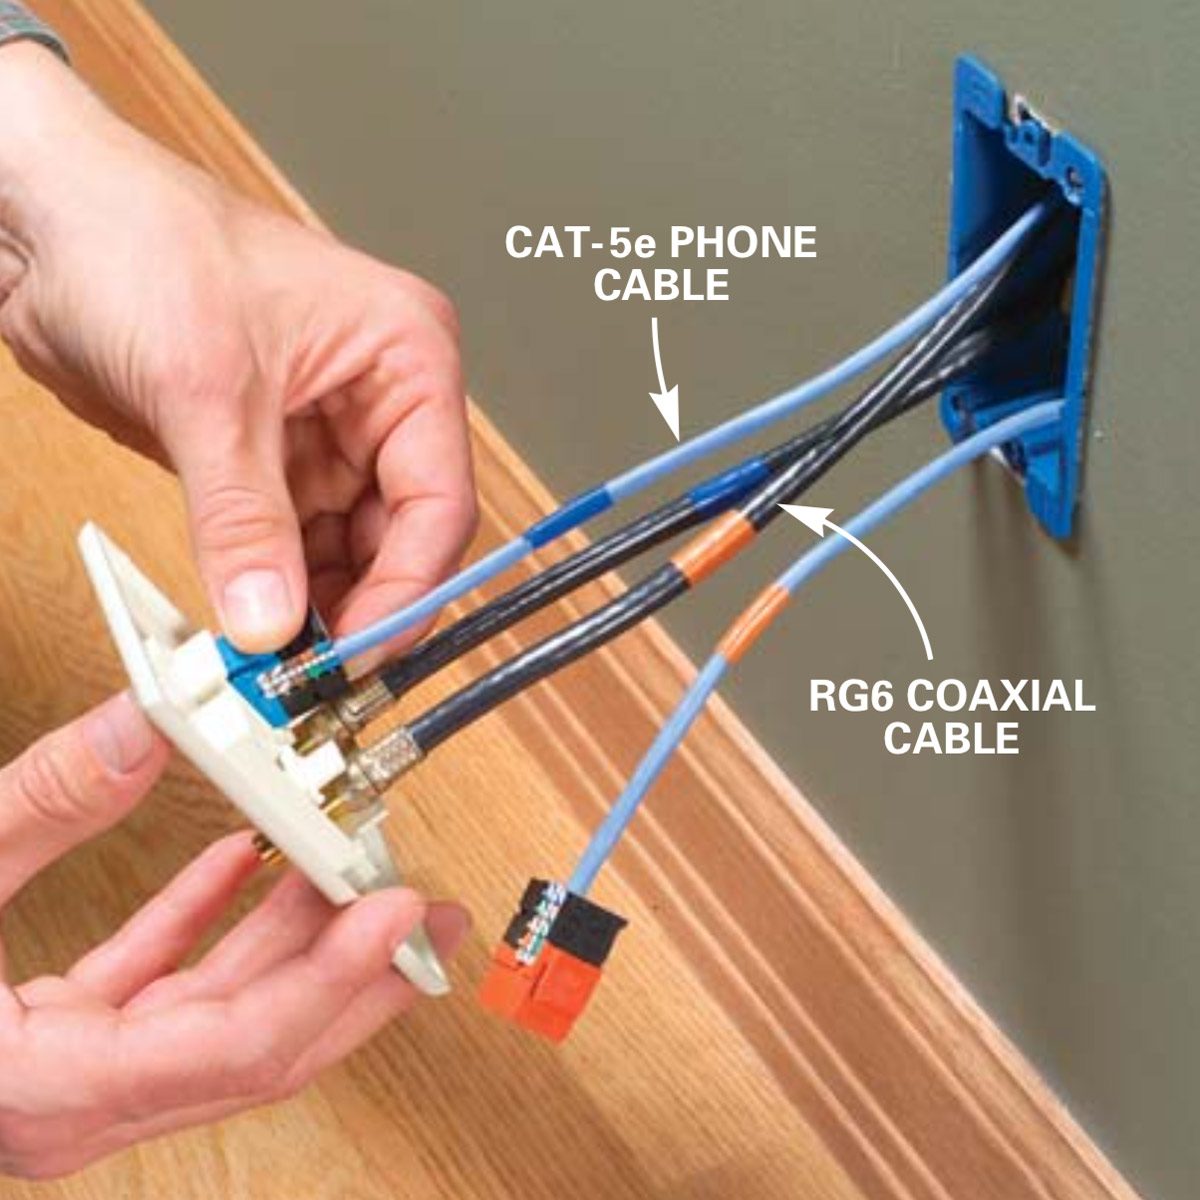 what's the best way to run wires tight down the corners of your walls? :  r/howto